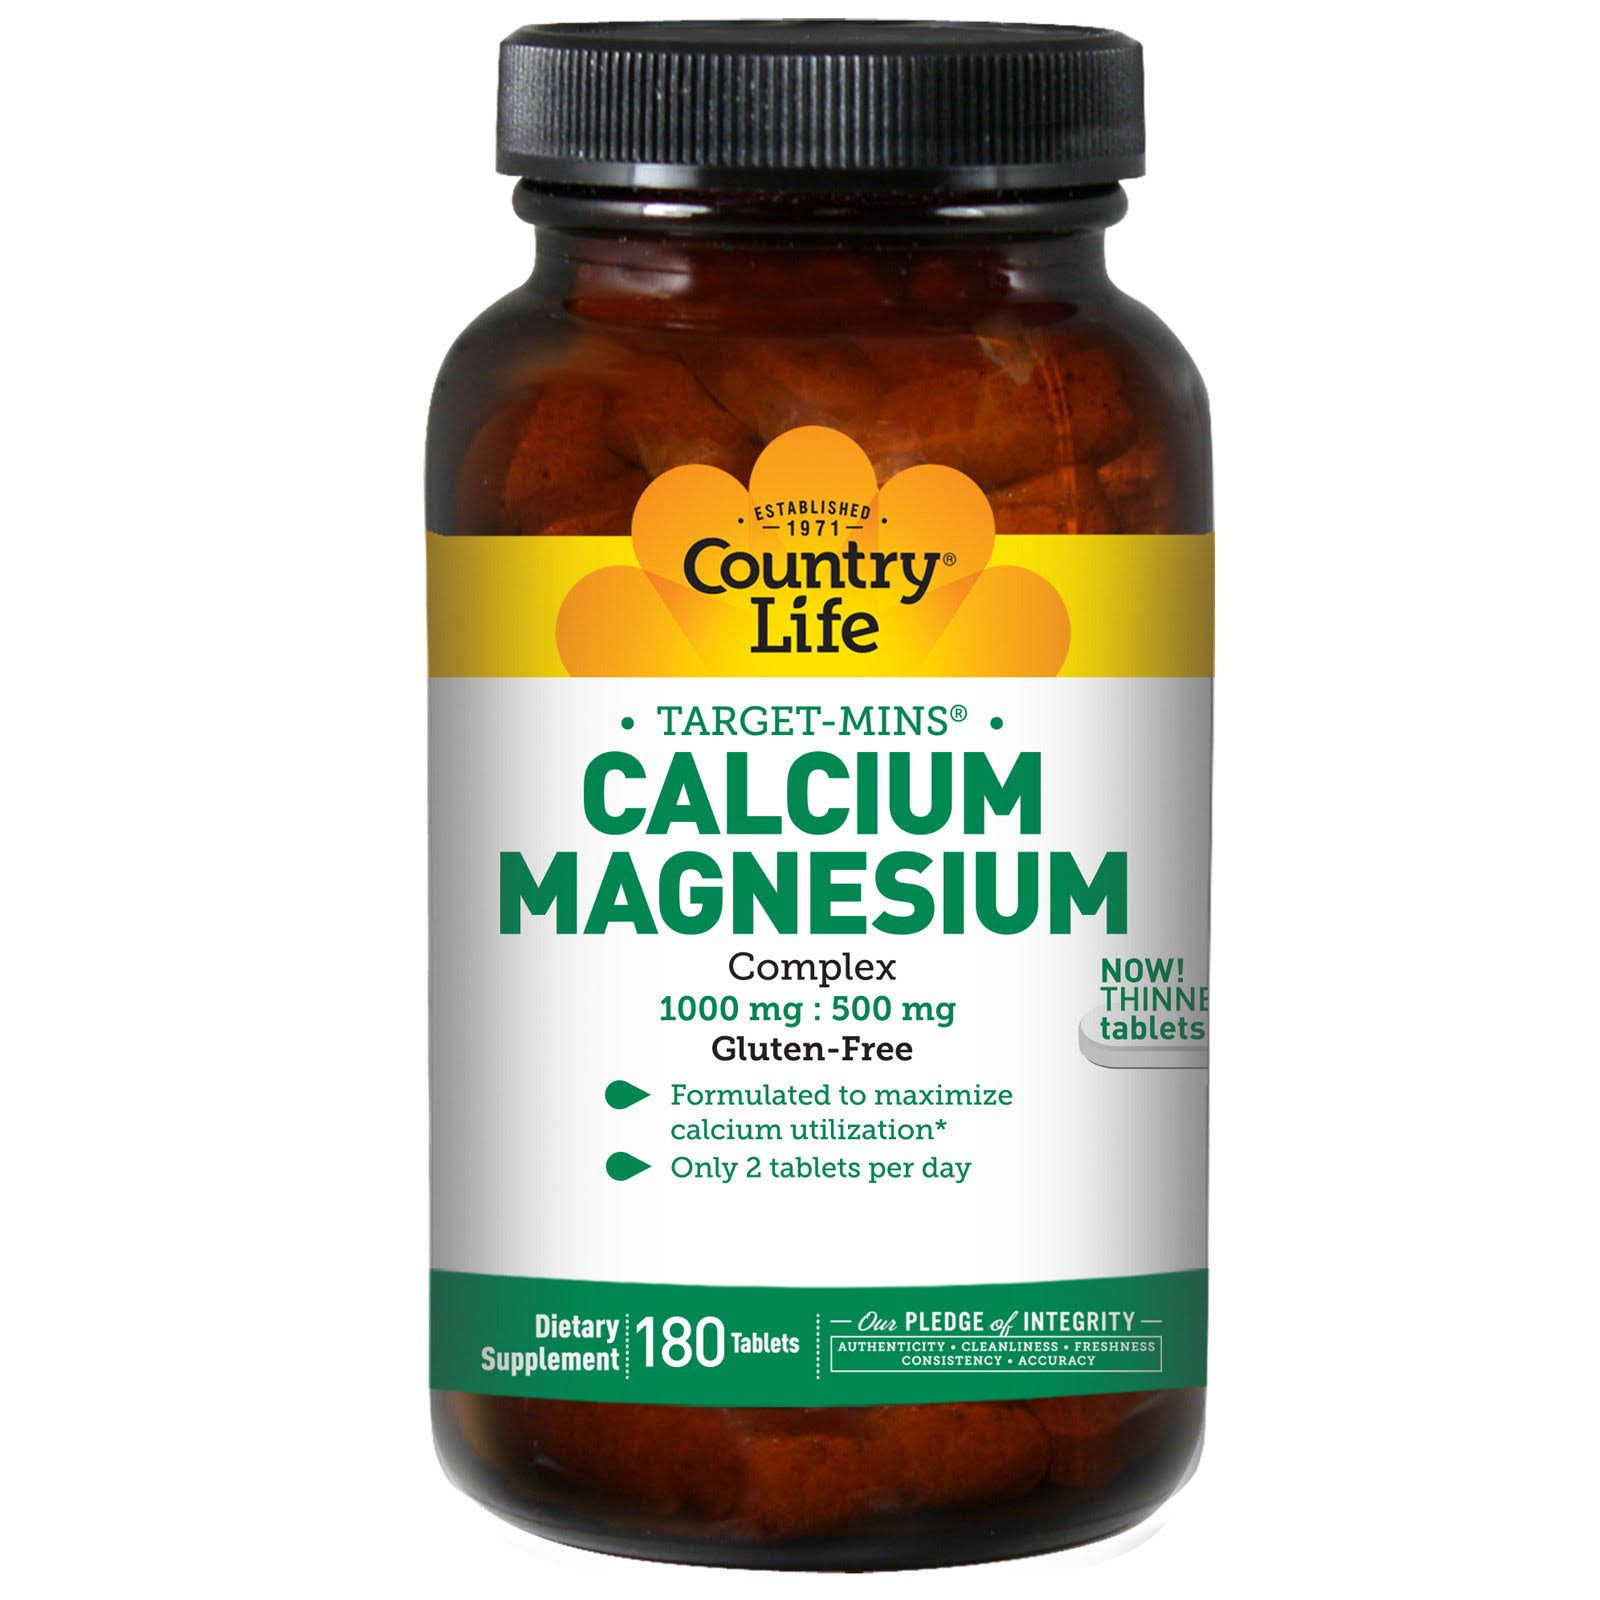 Country Life Calcium Magnesium Complex Supplement - 180 Tablets